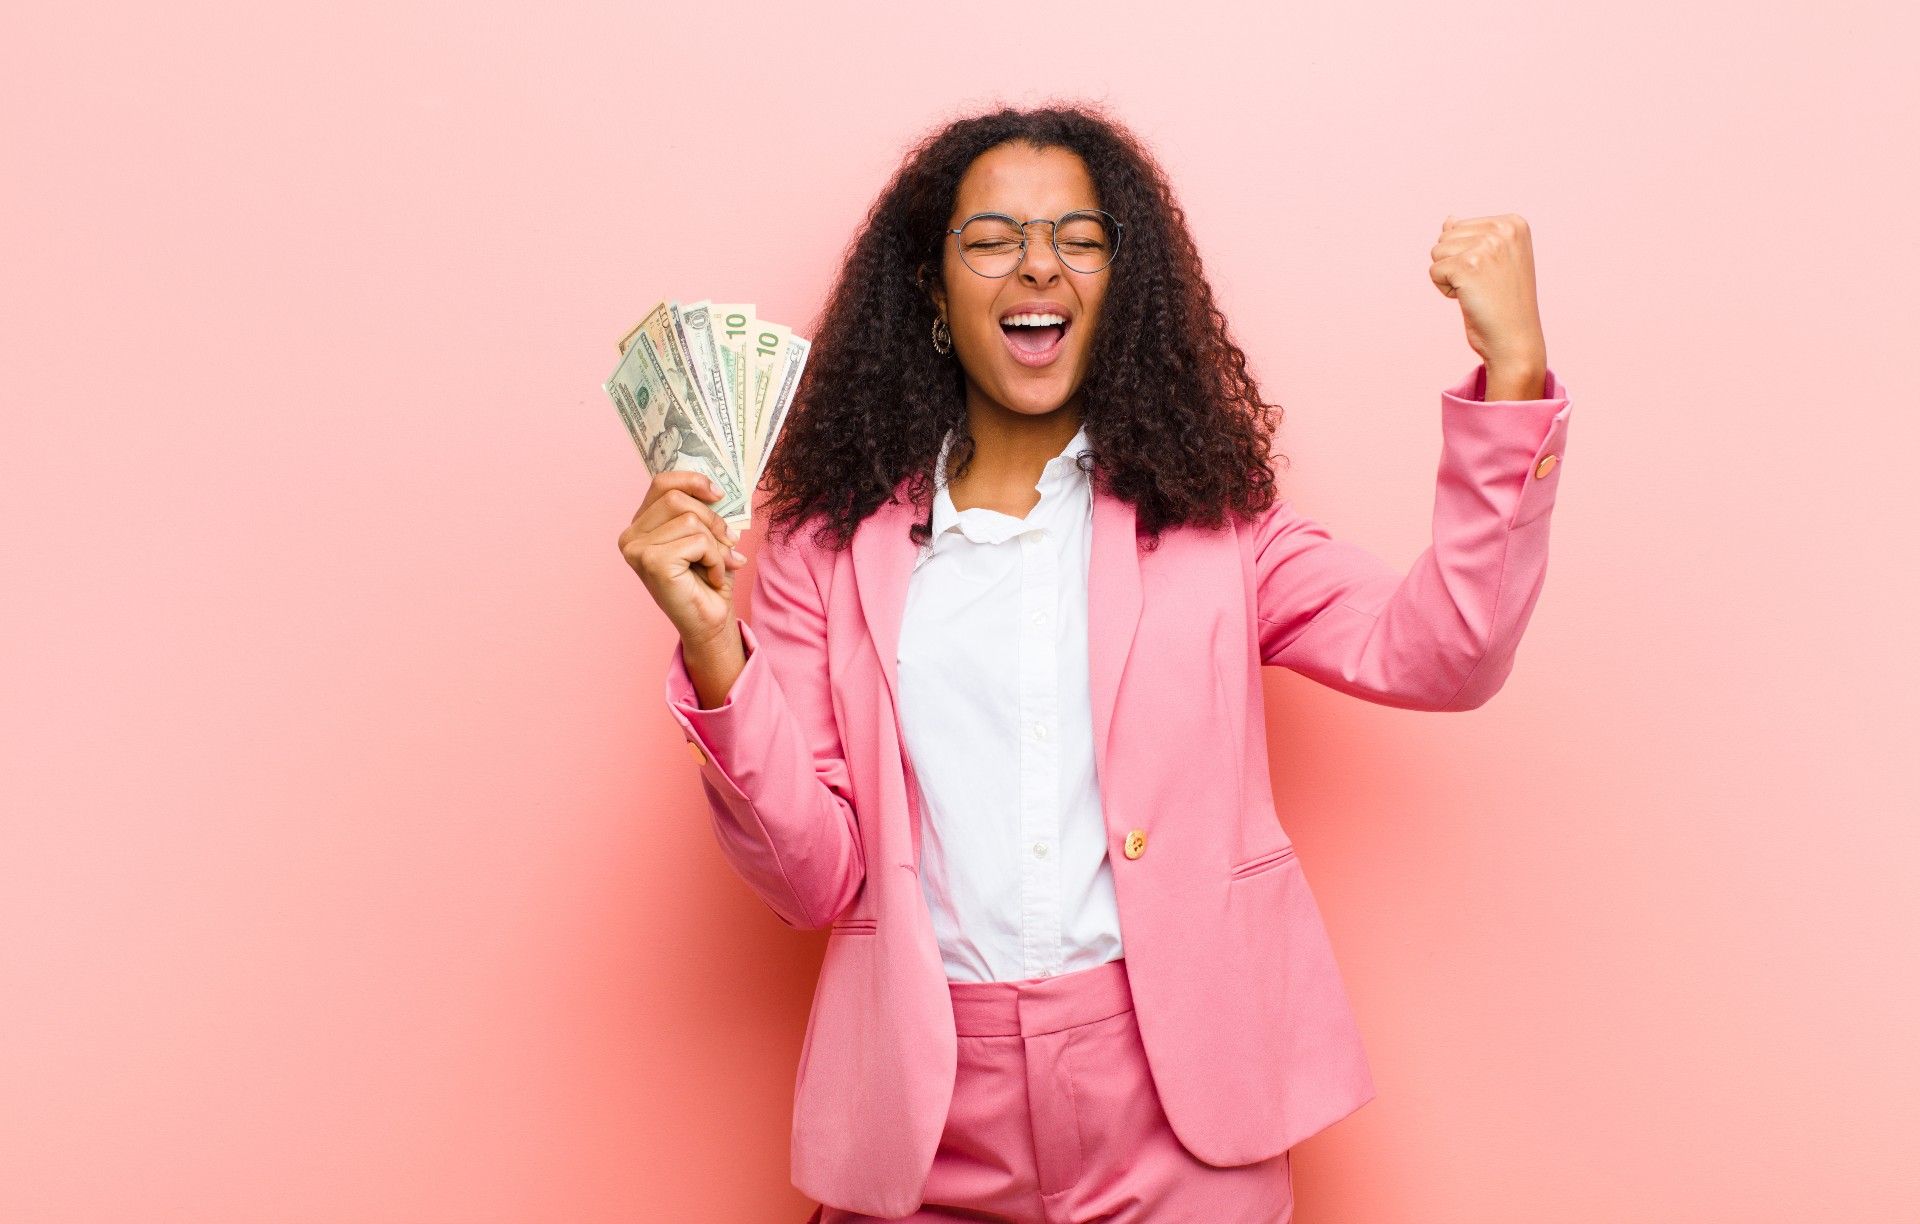 A woman in a pink suit standing against a rosy background closes her eyes and holds up a handful of fanned-out cash while pumping her fist with the other hand.